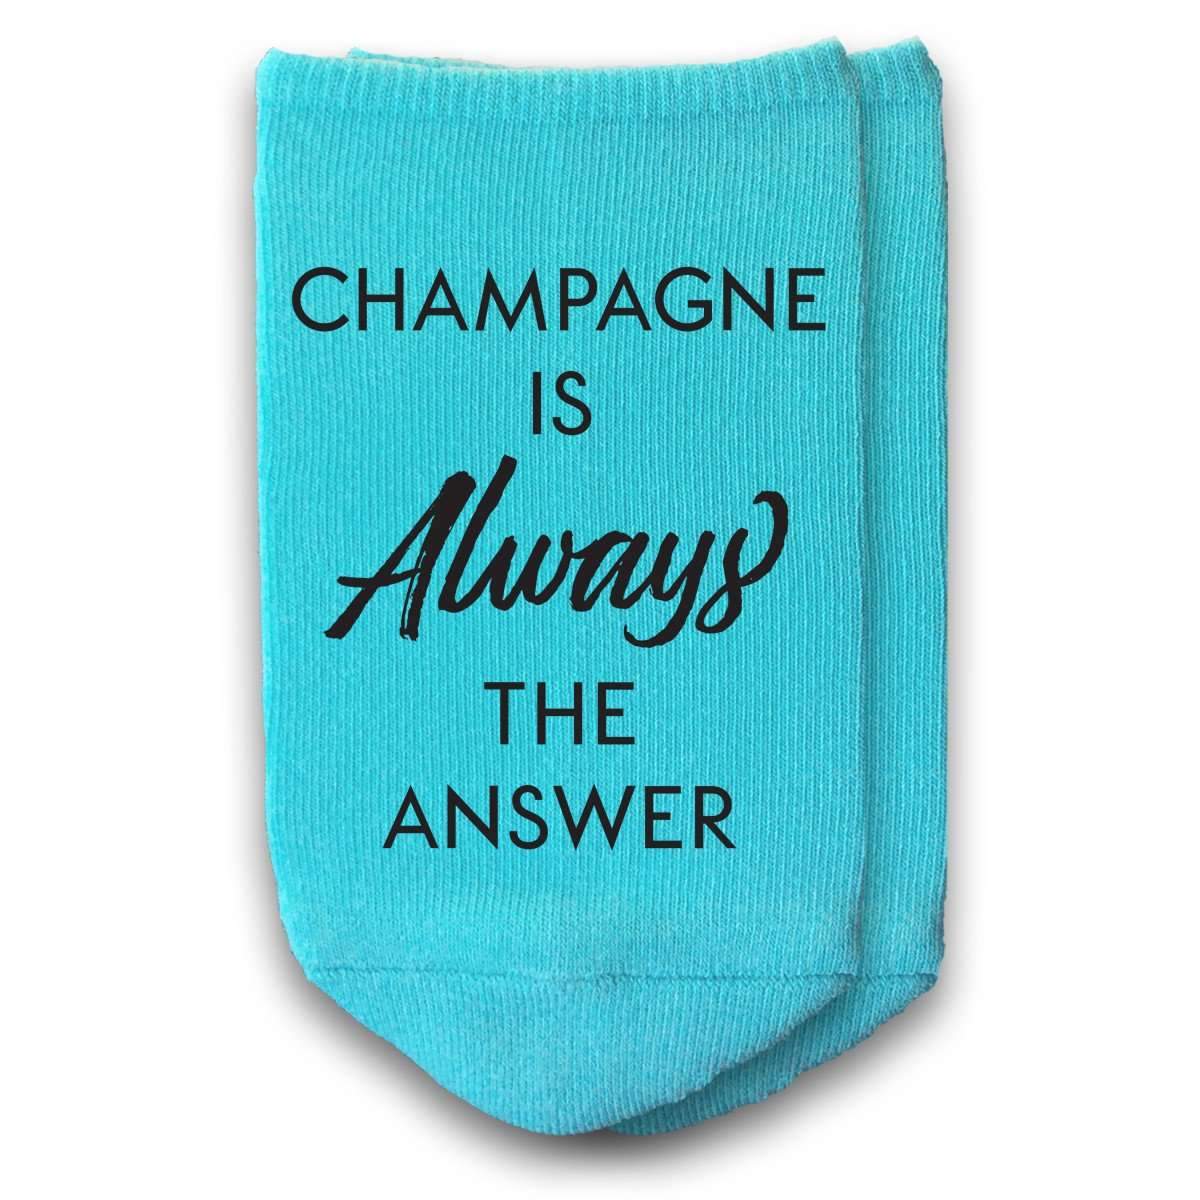 Champagne is always the answer custom printed on no show socks.